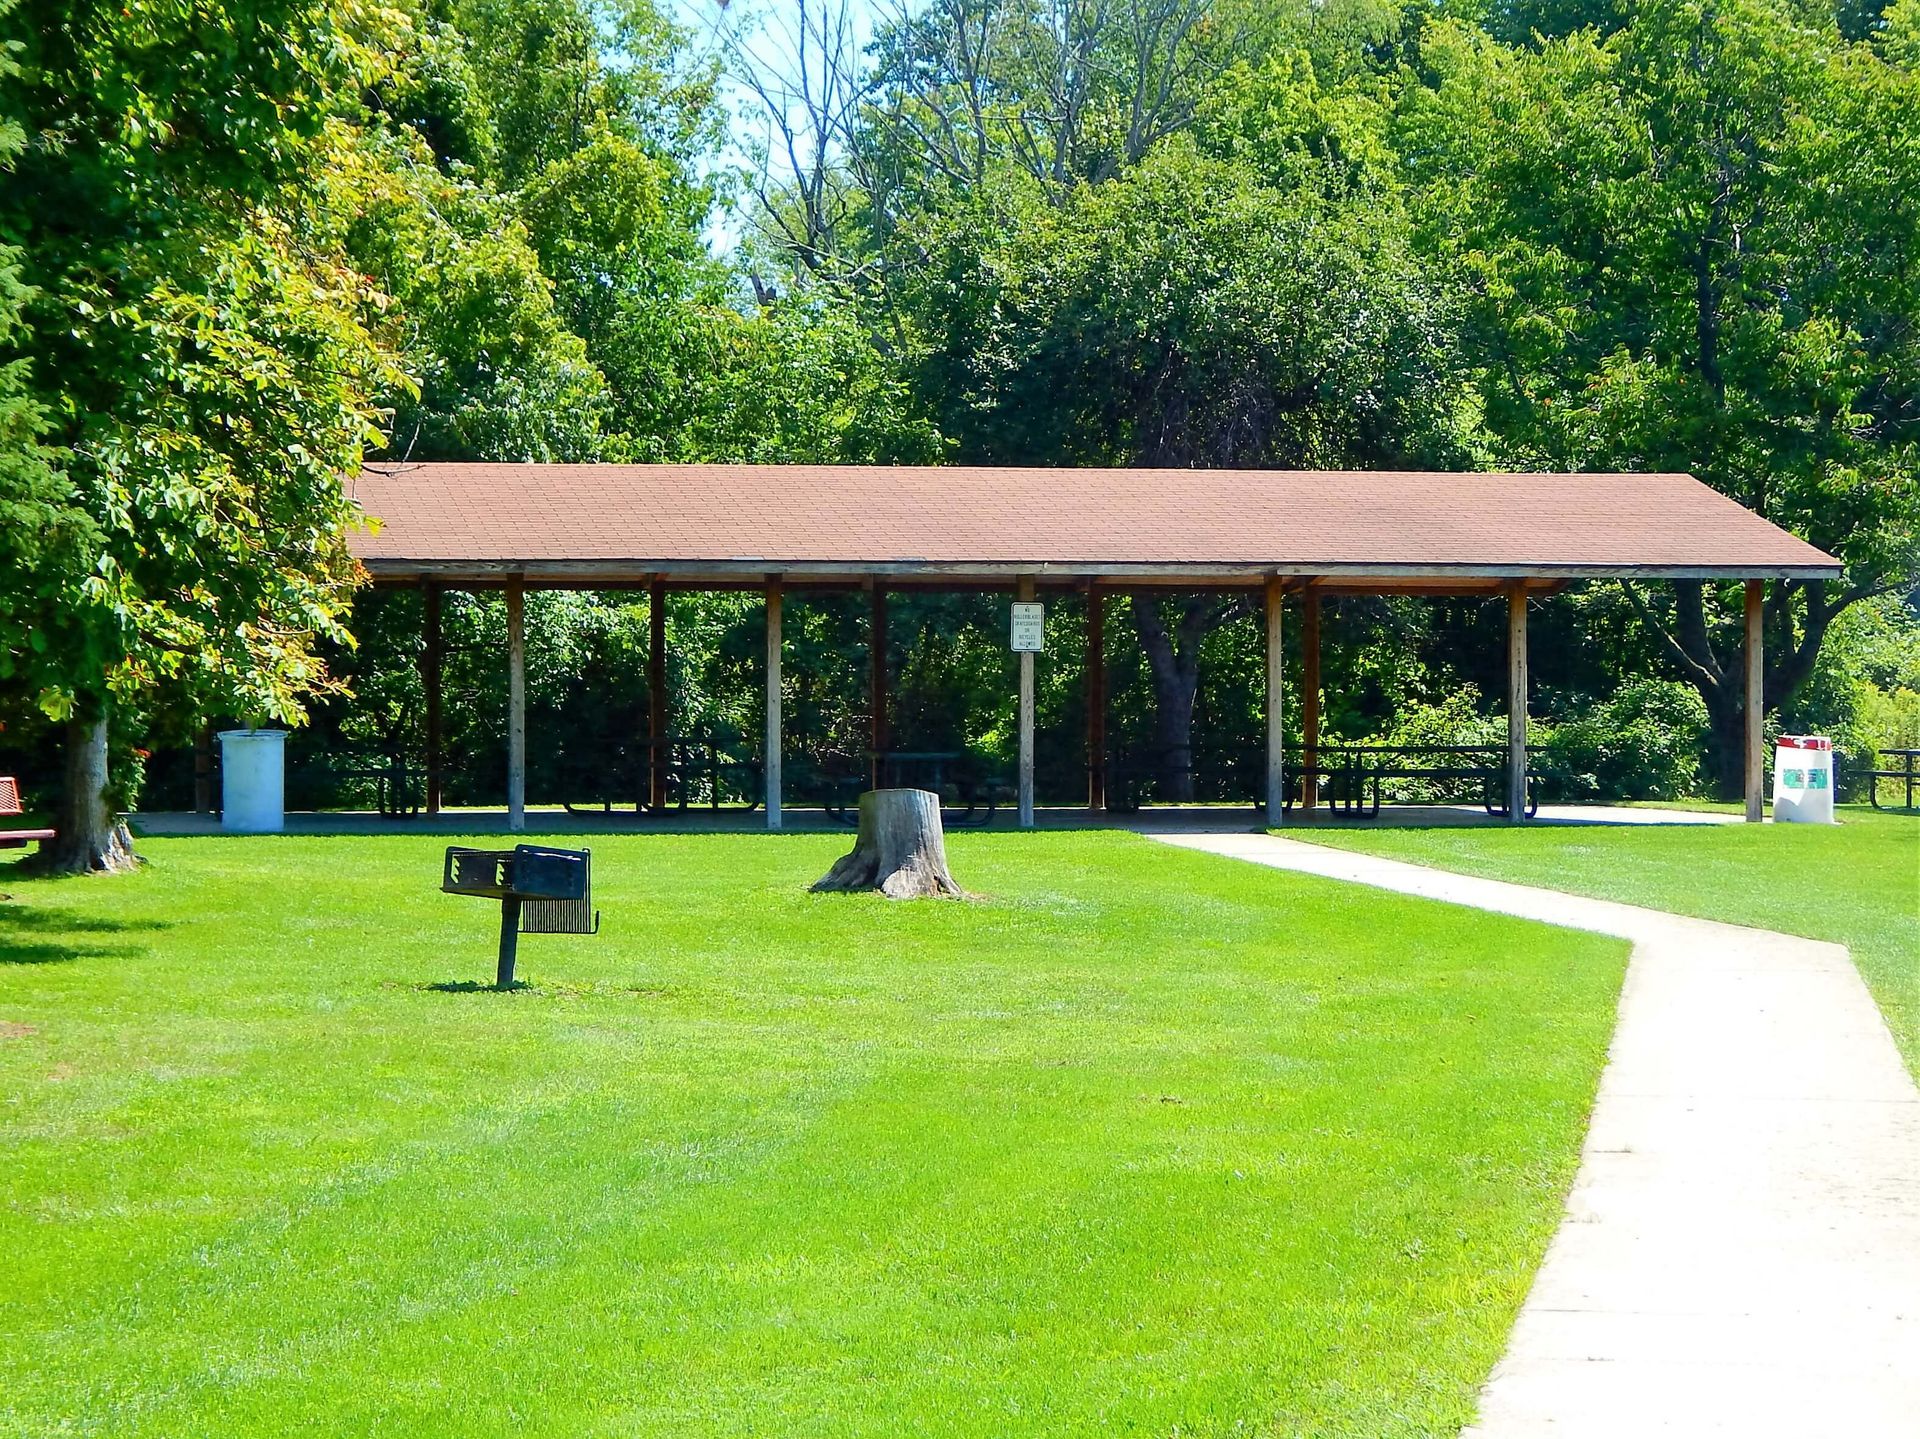 A picnic shelter in the middle of a park.